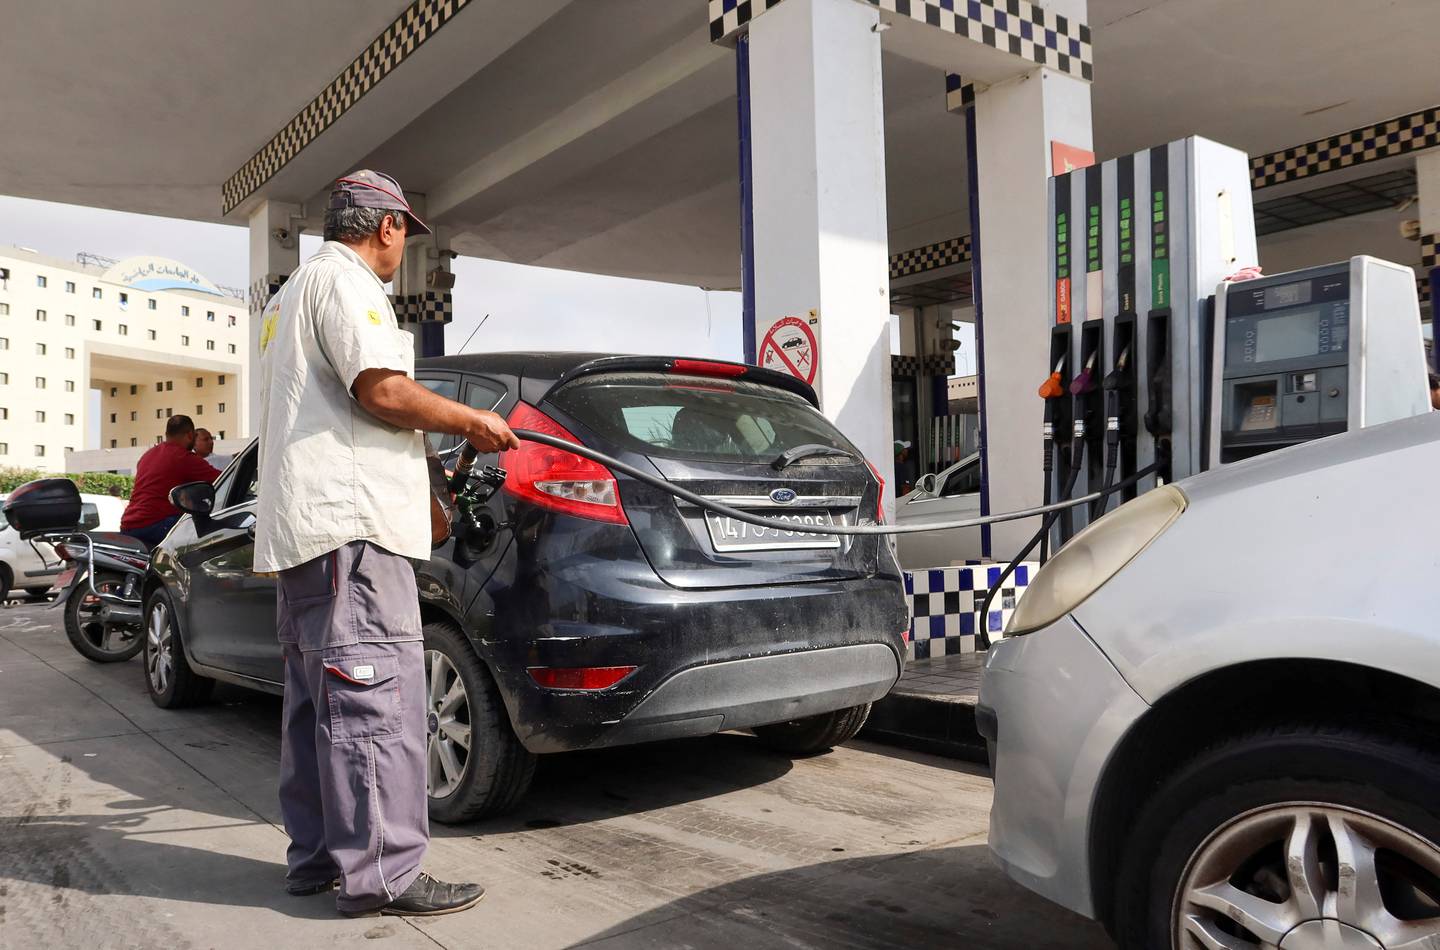 A gas station attendant pumps fuel into a customer's car at a gas station in Tunis, Tunisia 